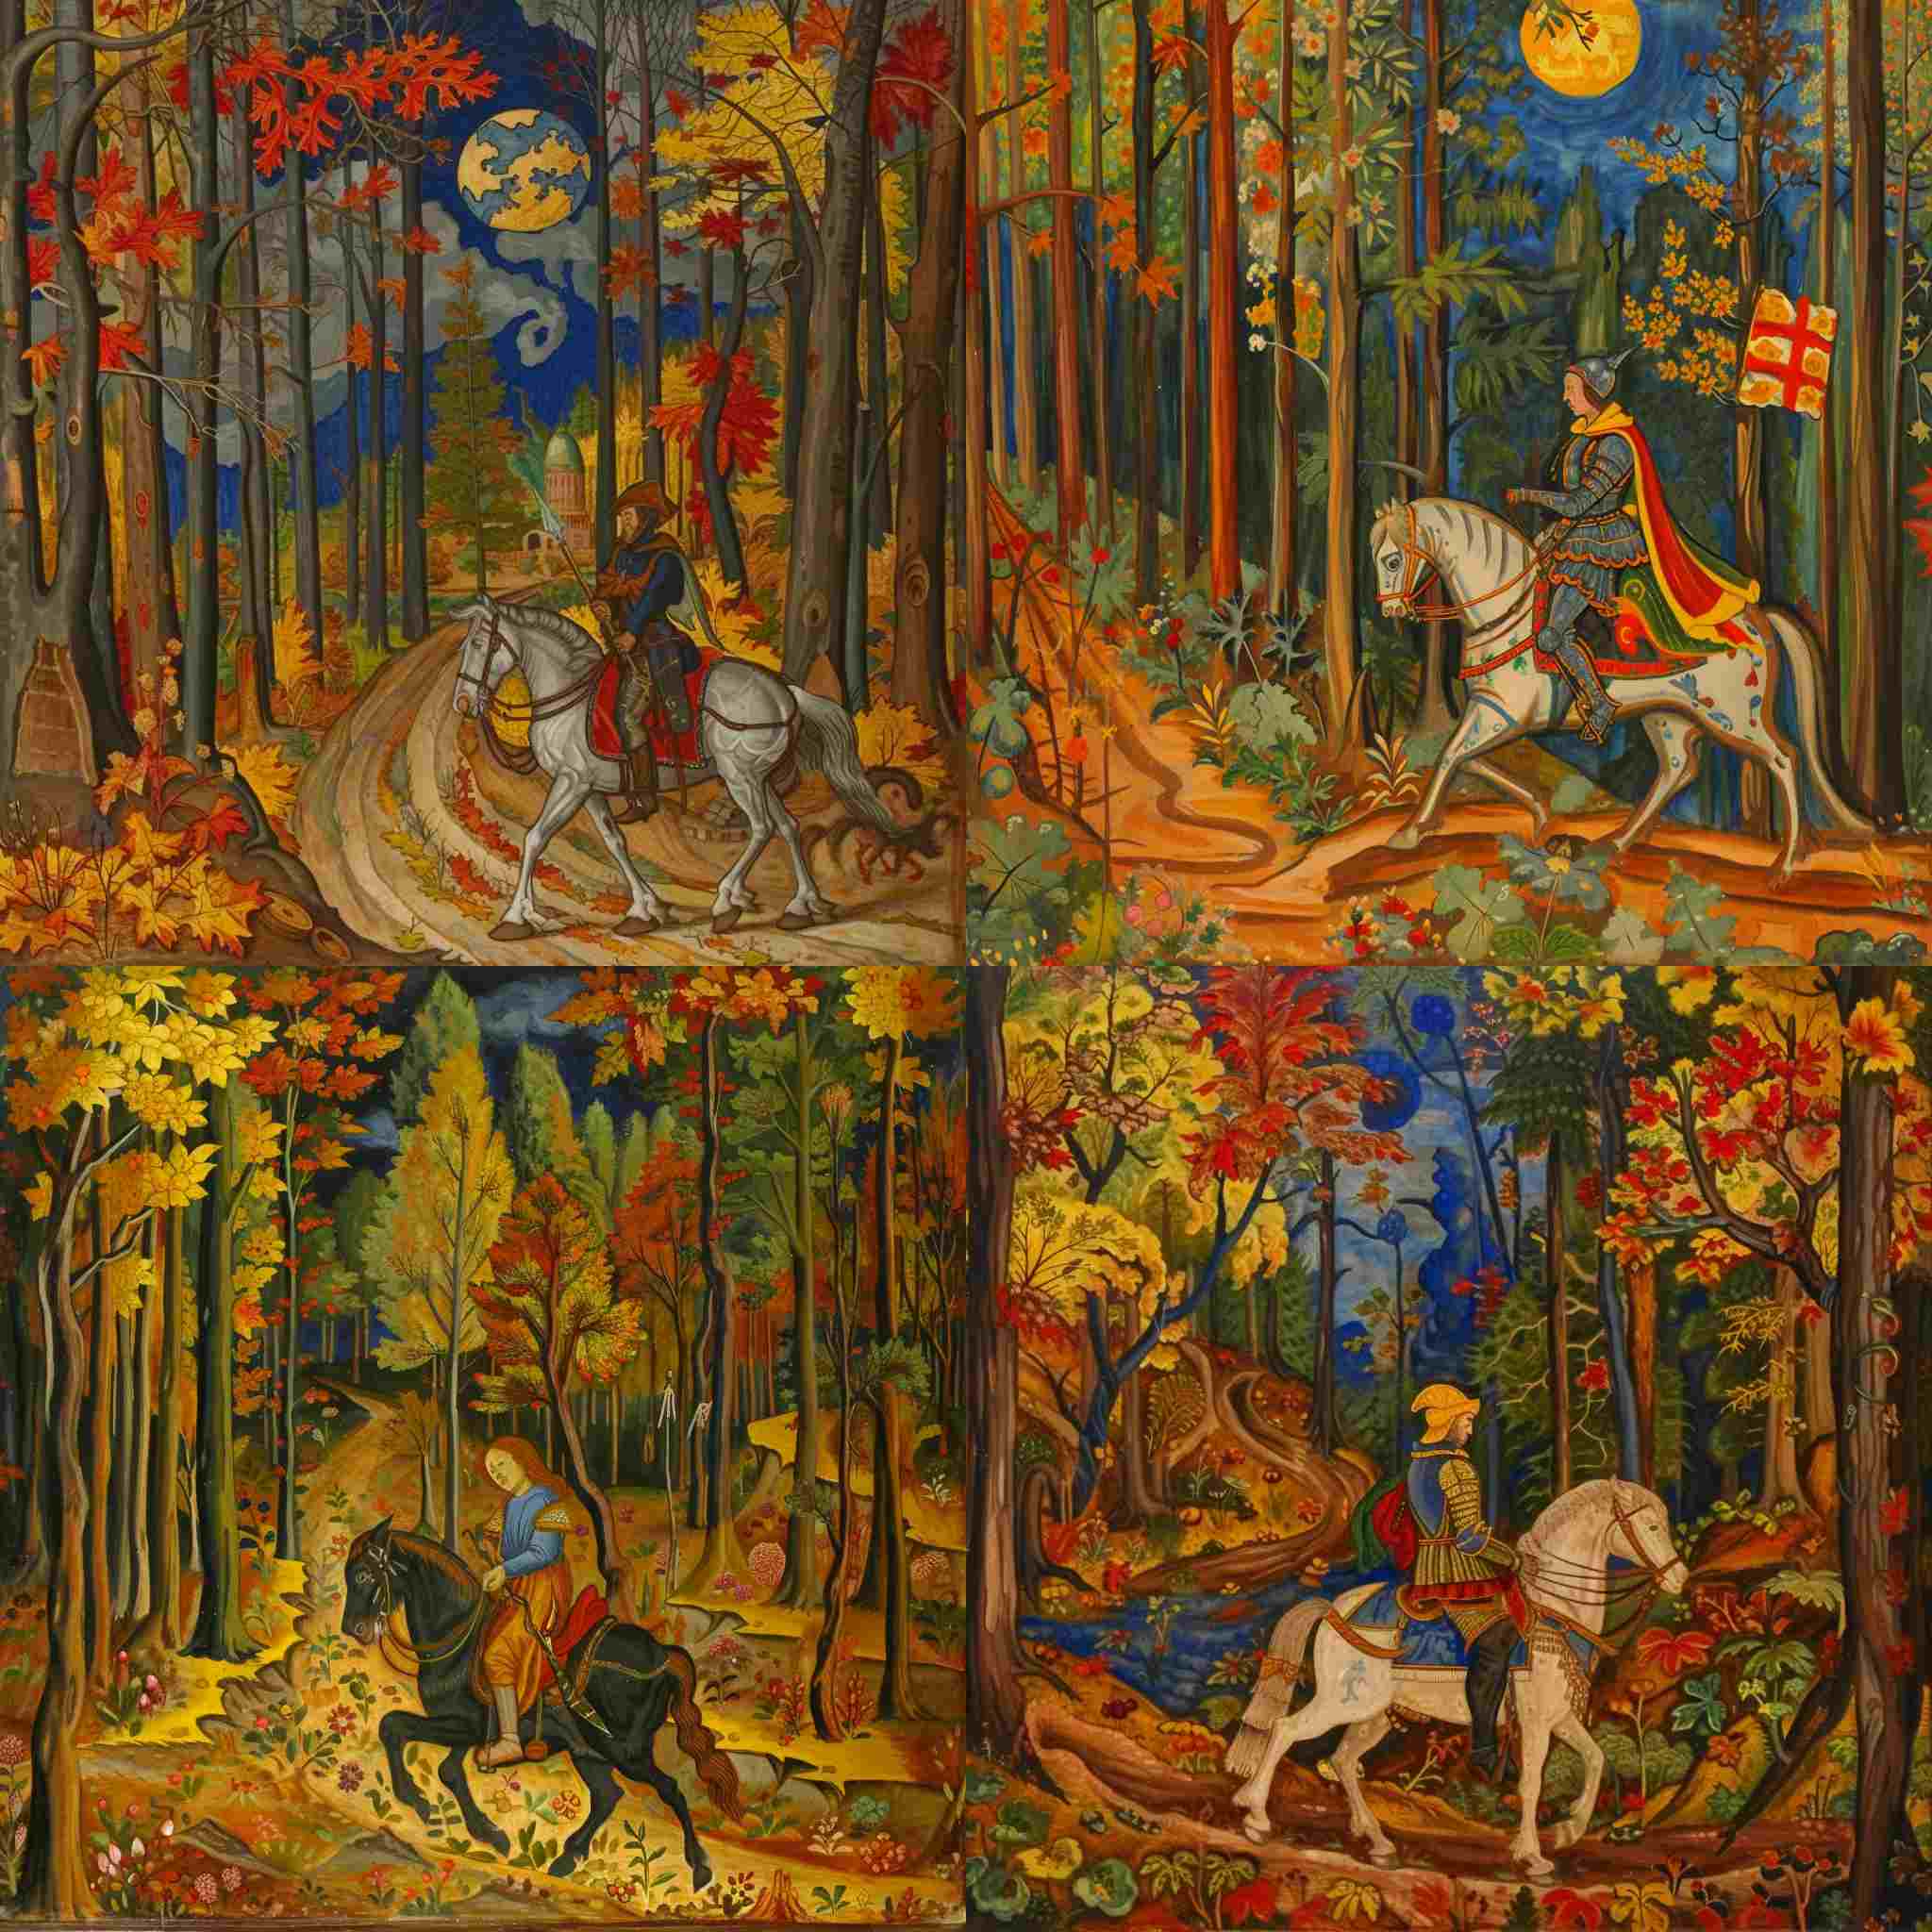 4 images of a warrior riding in a forest in a 2x2 grid with Mughal Style, Expressionist style and Abstract Art style transferred